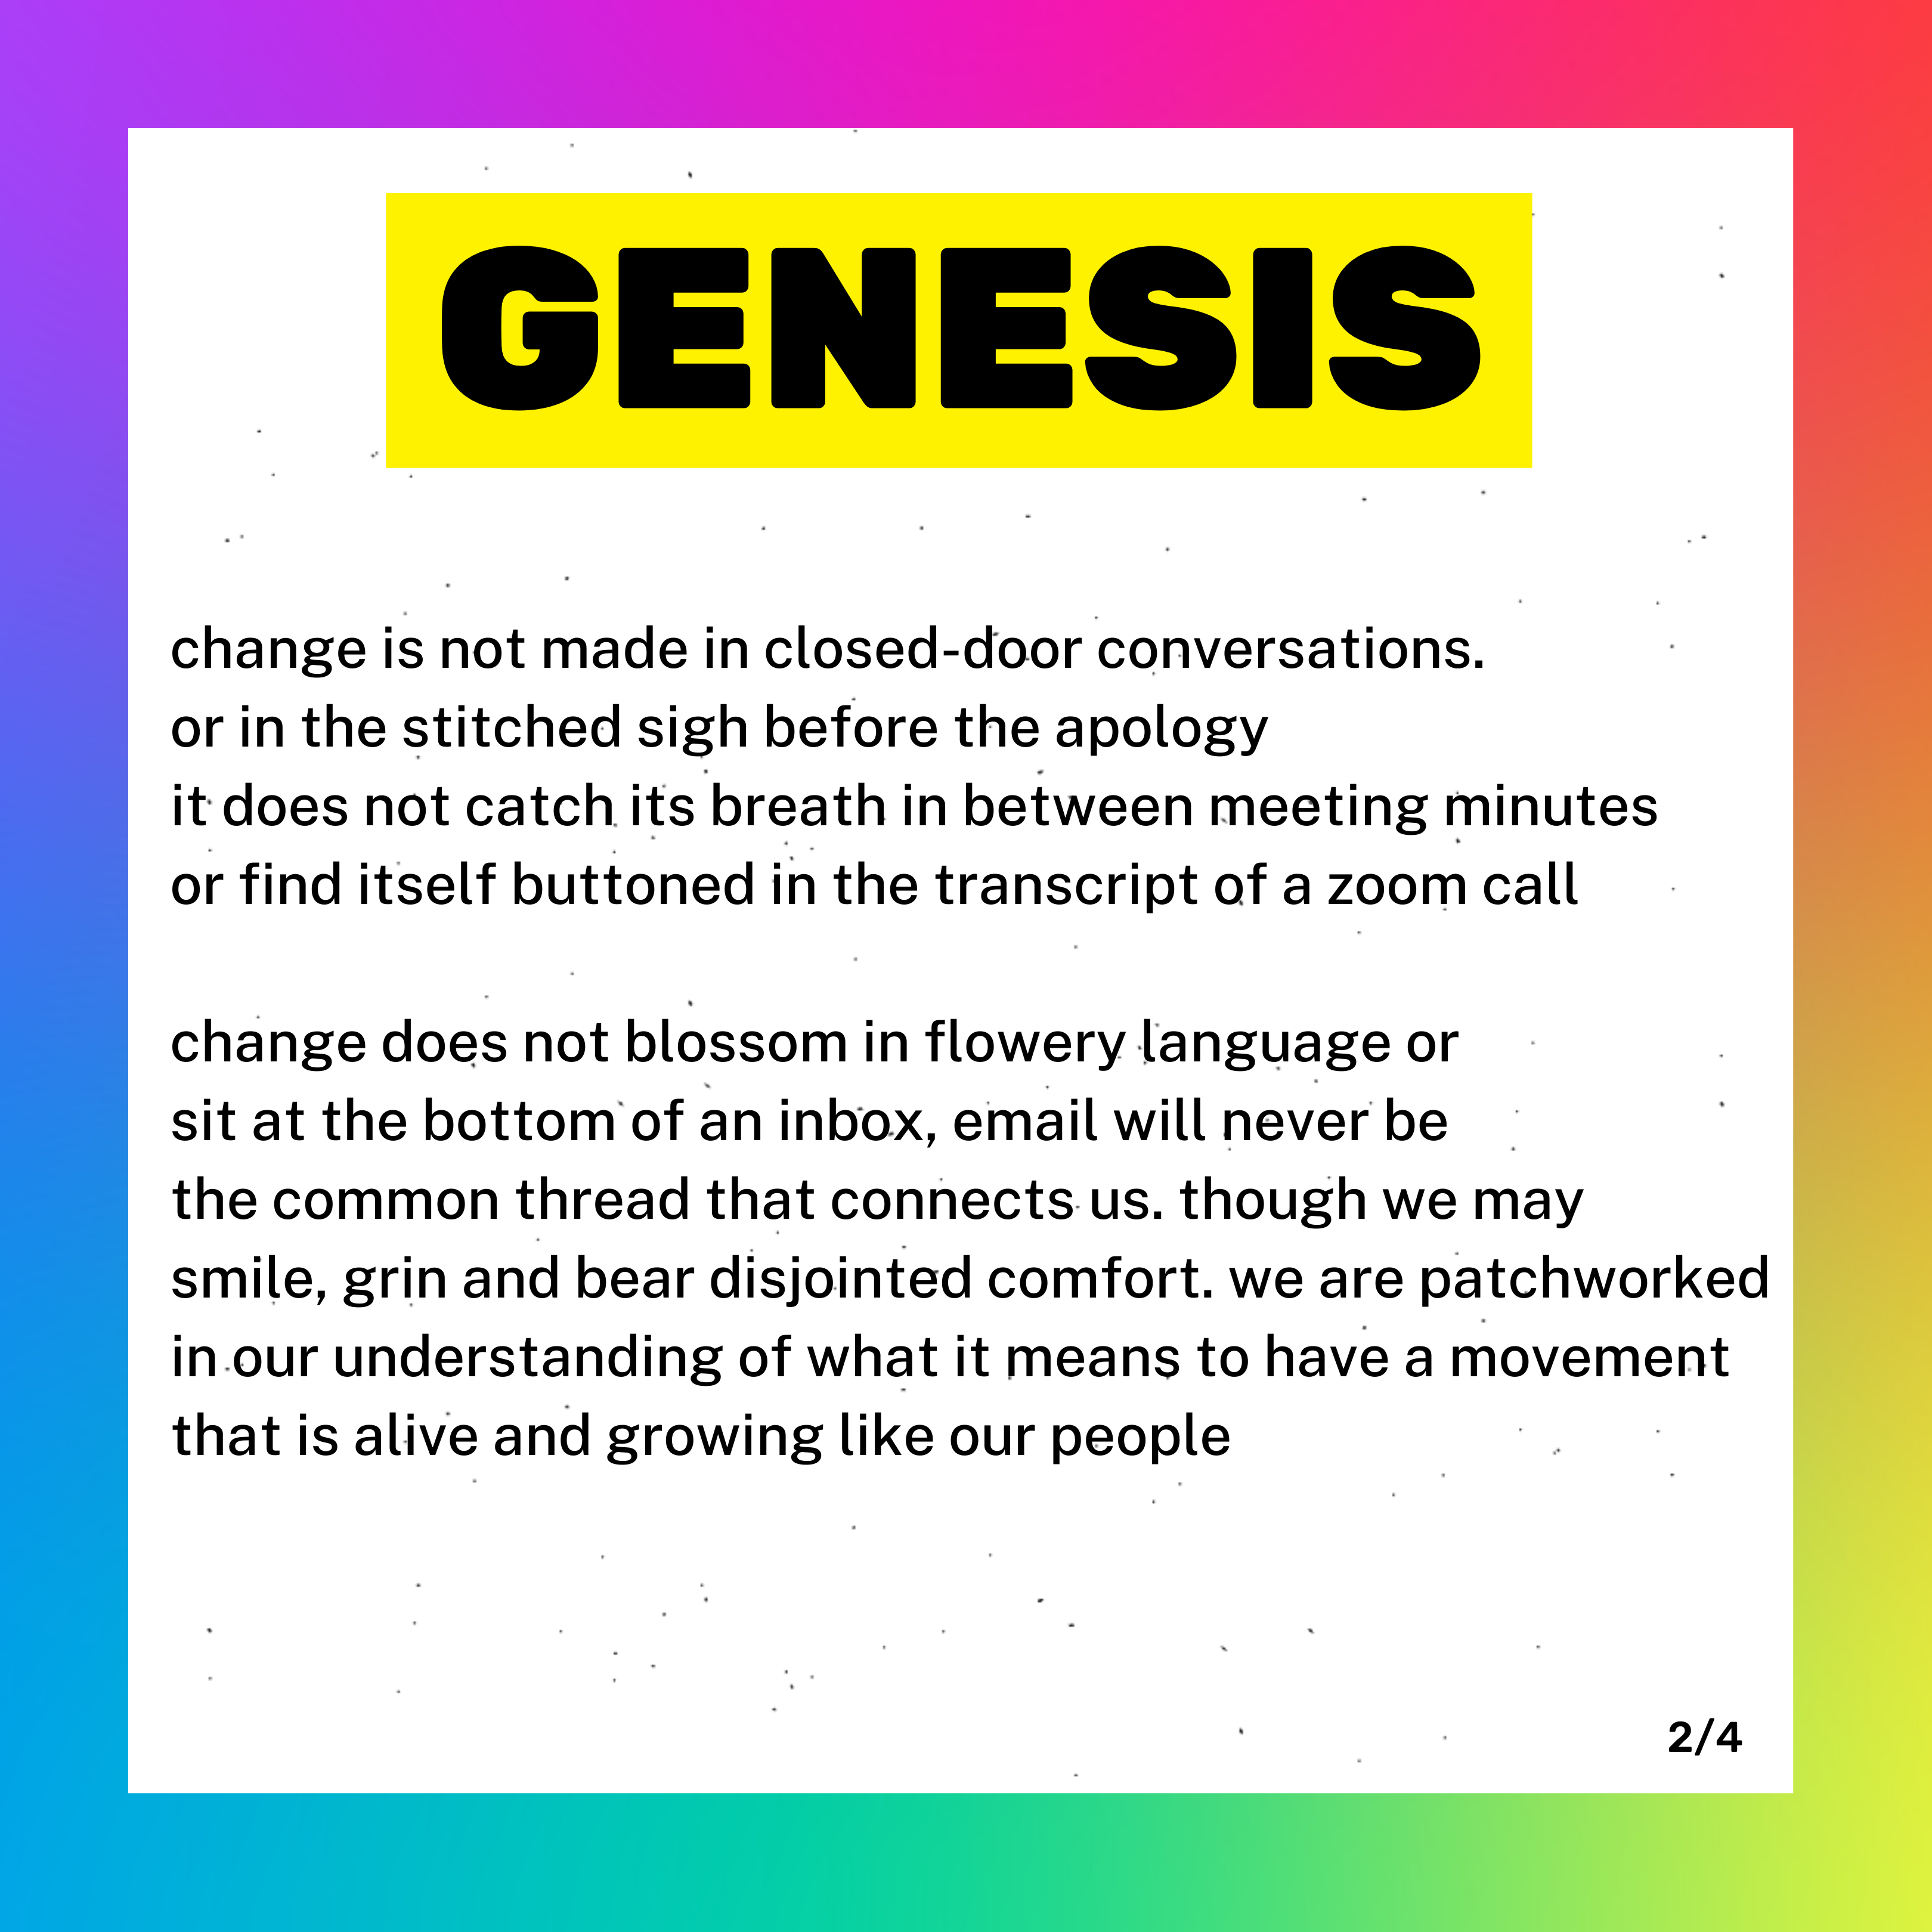 A box with a rainbow background and white foreground. Inside are the words GENESIS. It is part 2 of 4 of the poem. Below Genesis it reads: "change is not made in closed-door conversations. Or in the stitched sigh before the apology. It does not catch its breath in between meeting minutes or find itself buttoned in the transcript of a zoom call. Change does not blossom in flowery language or sit at the bottom of an inbox, email will never be the common thread that connects us. Though we may smile, grin and bear disjointed comfort. We are patchworked in our understanding of what it means to have a movement that is alive and growing like our people."